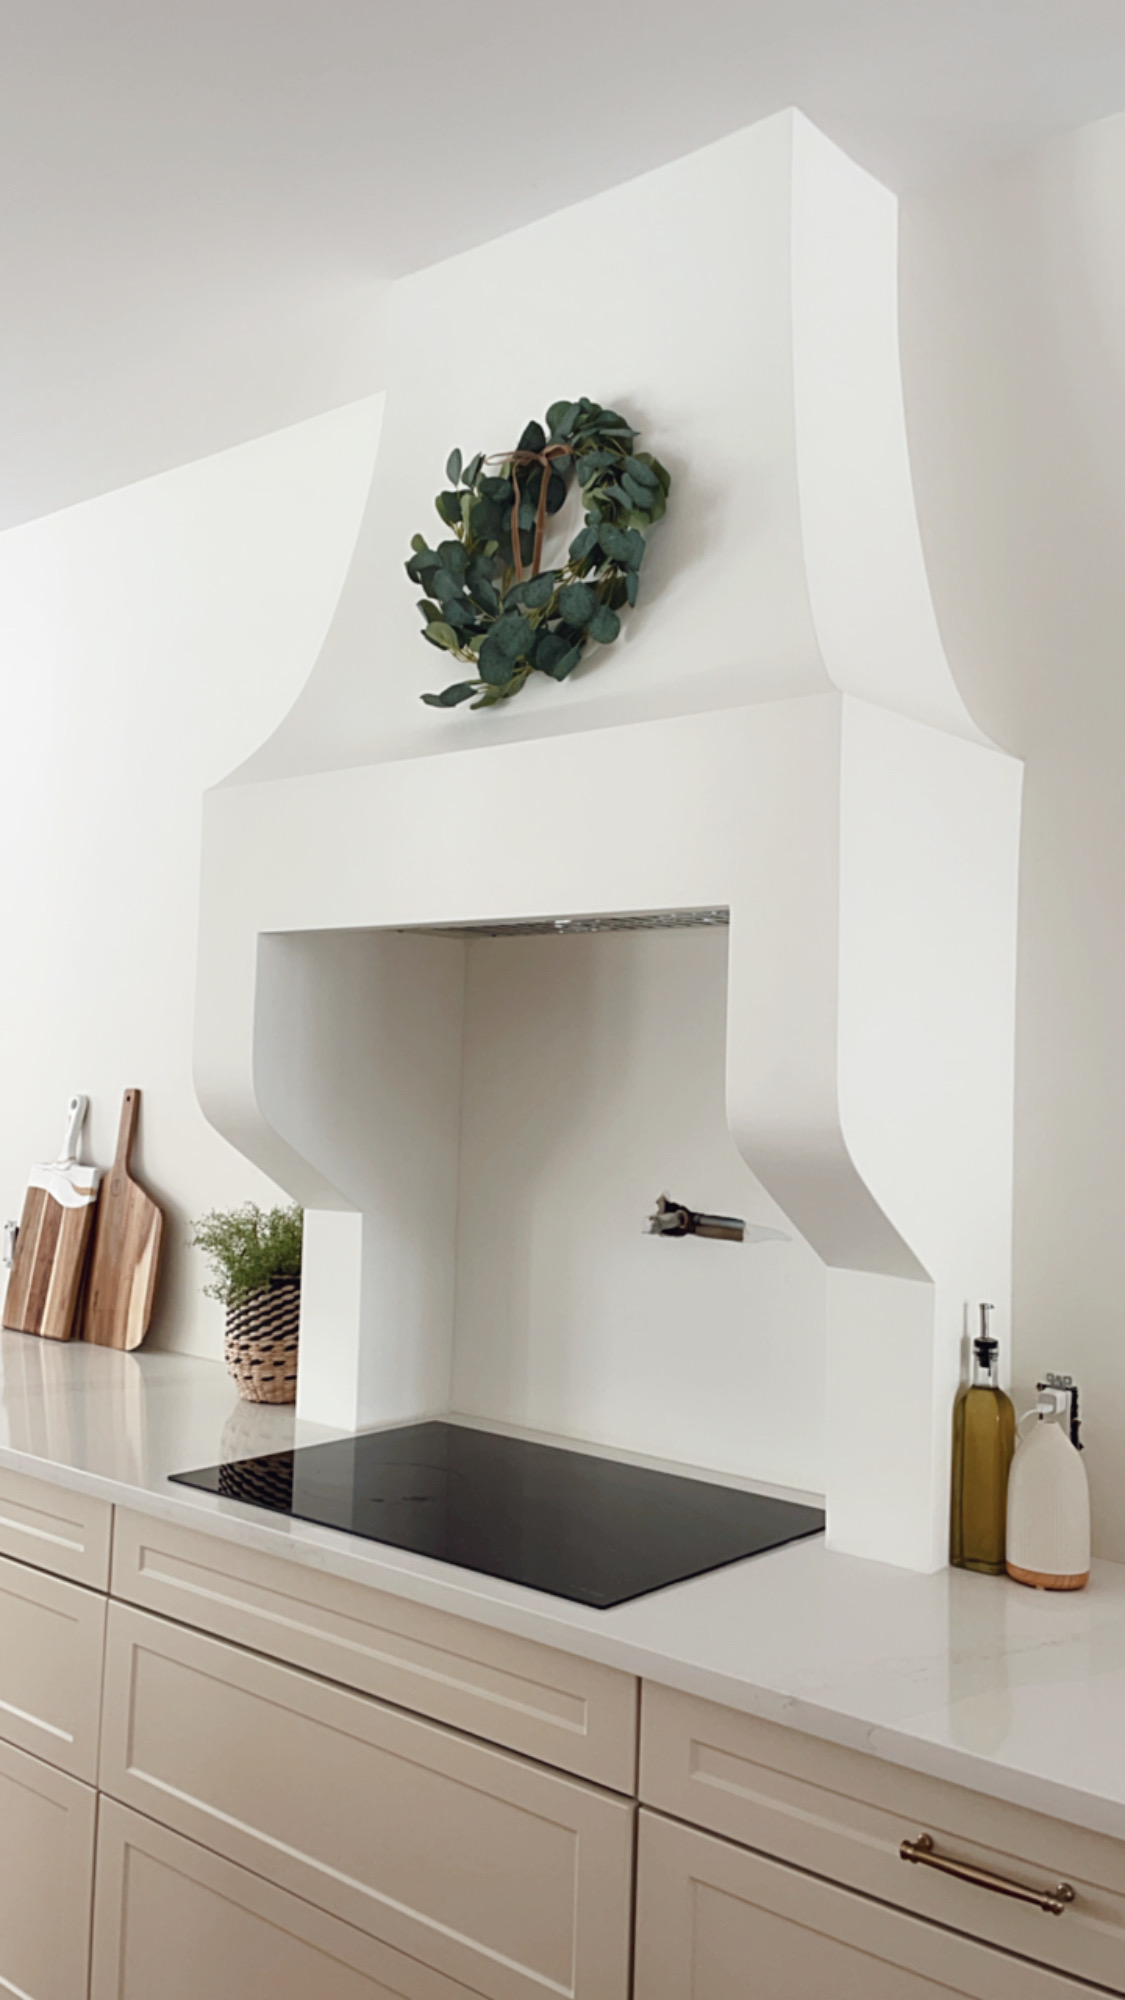 7 Step Guide on how to build our DIY Range Hood